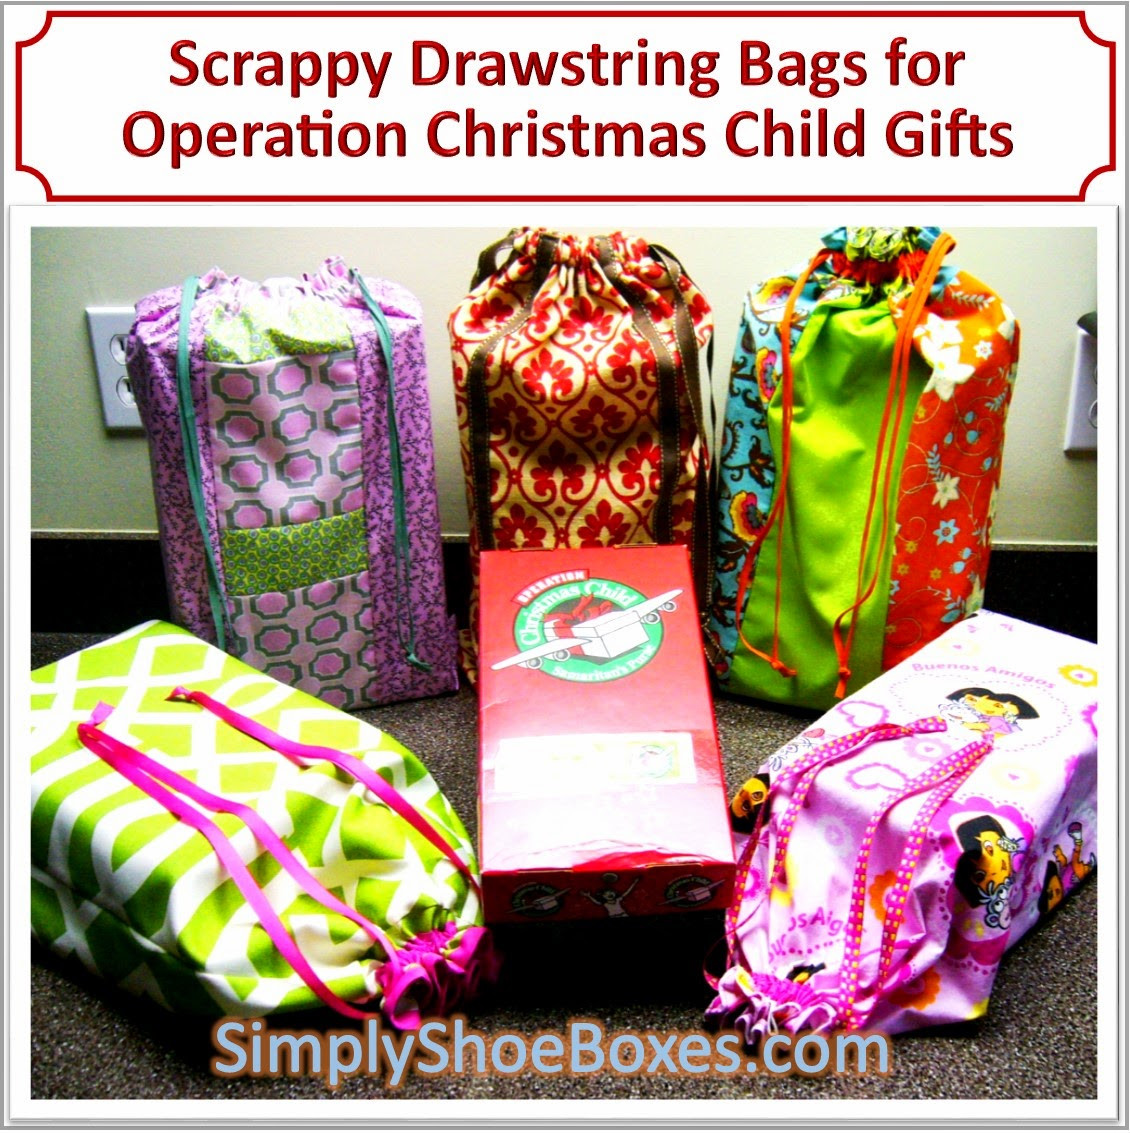 Operation Christmas Child Gift Ideas
 Simply Shoeboxes Scrappy Drawstring Tote Bags for